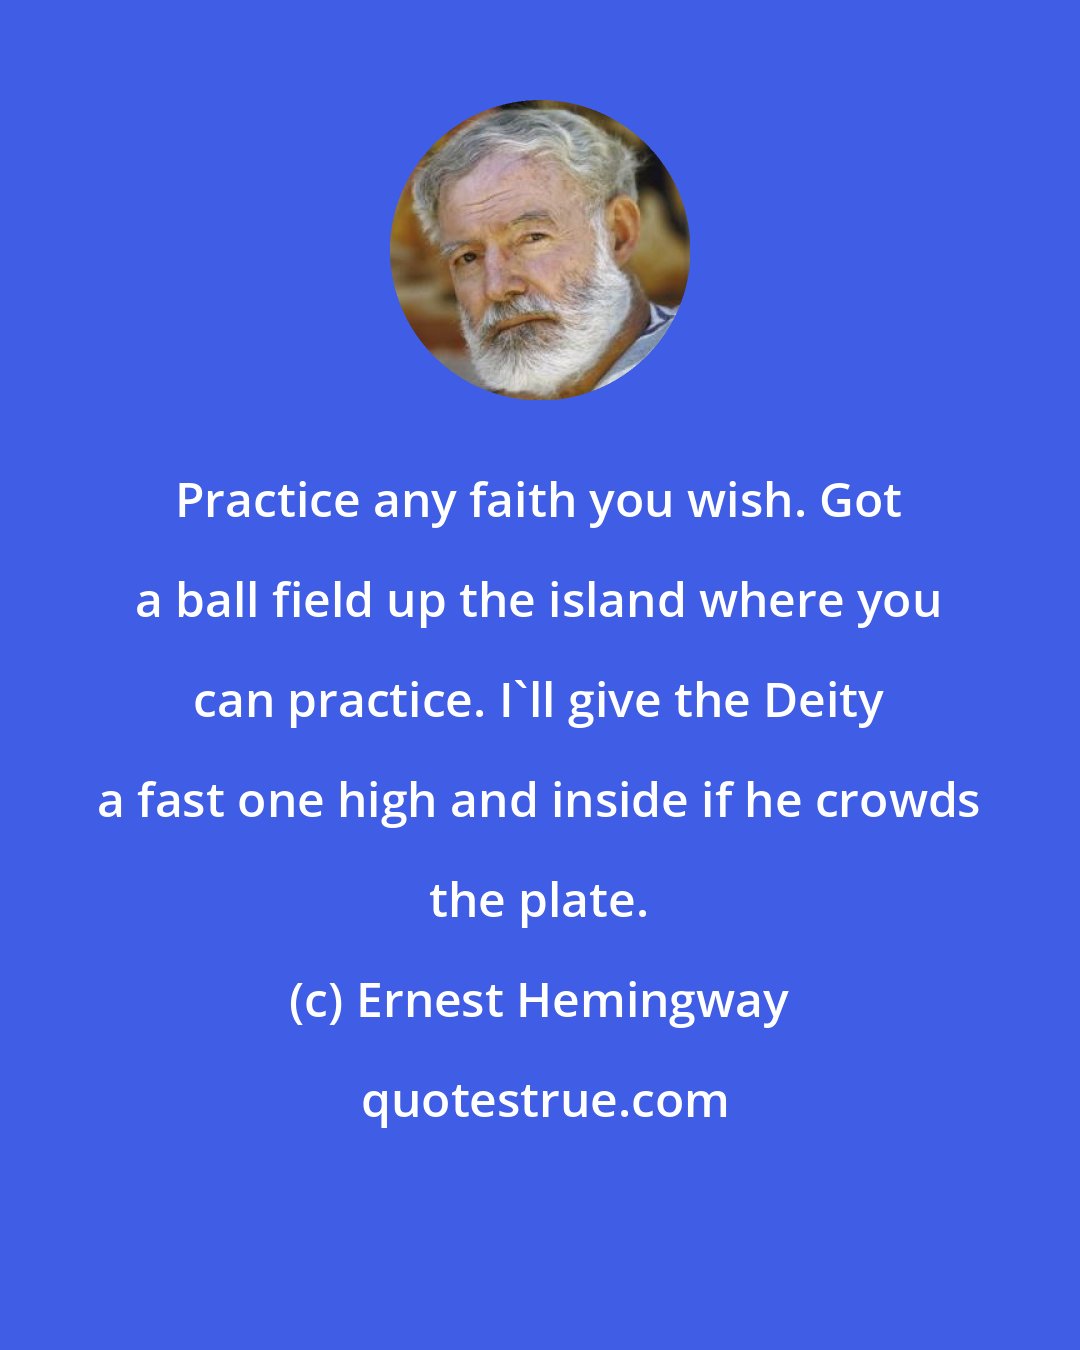 Ernest Hemingway: Practice any faith you wish. Got a ball field up the island where you can practice. I'll give the Deity a fast one high and inside if he crowds the plate.